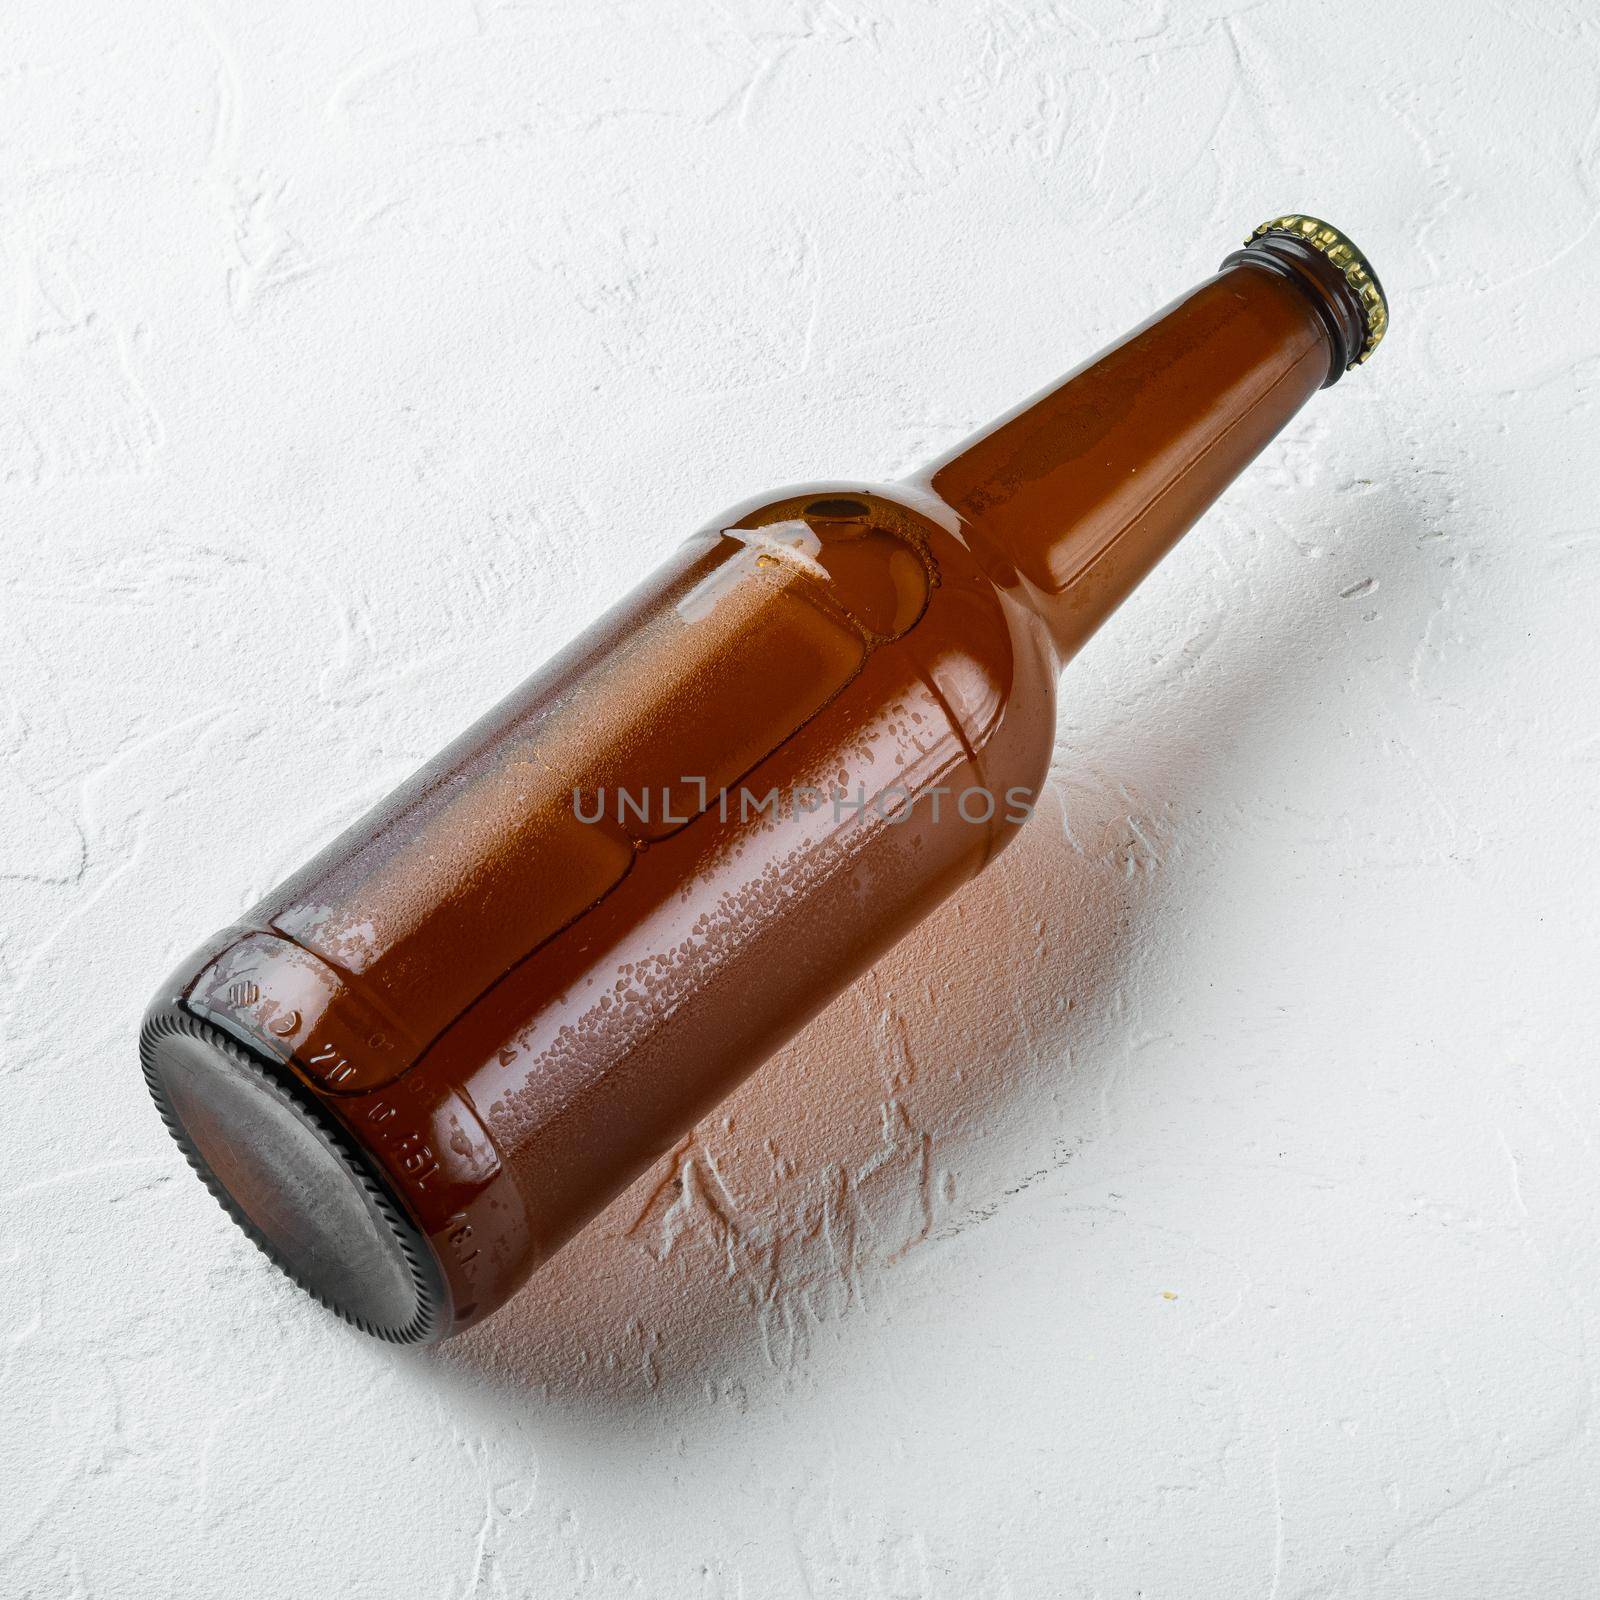 Fresh beer in glass bottles set, on white stone surface, square format